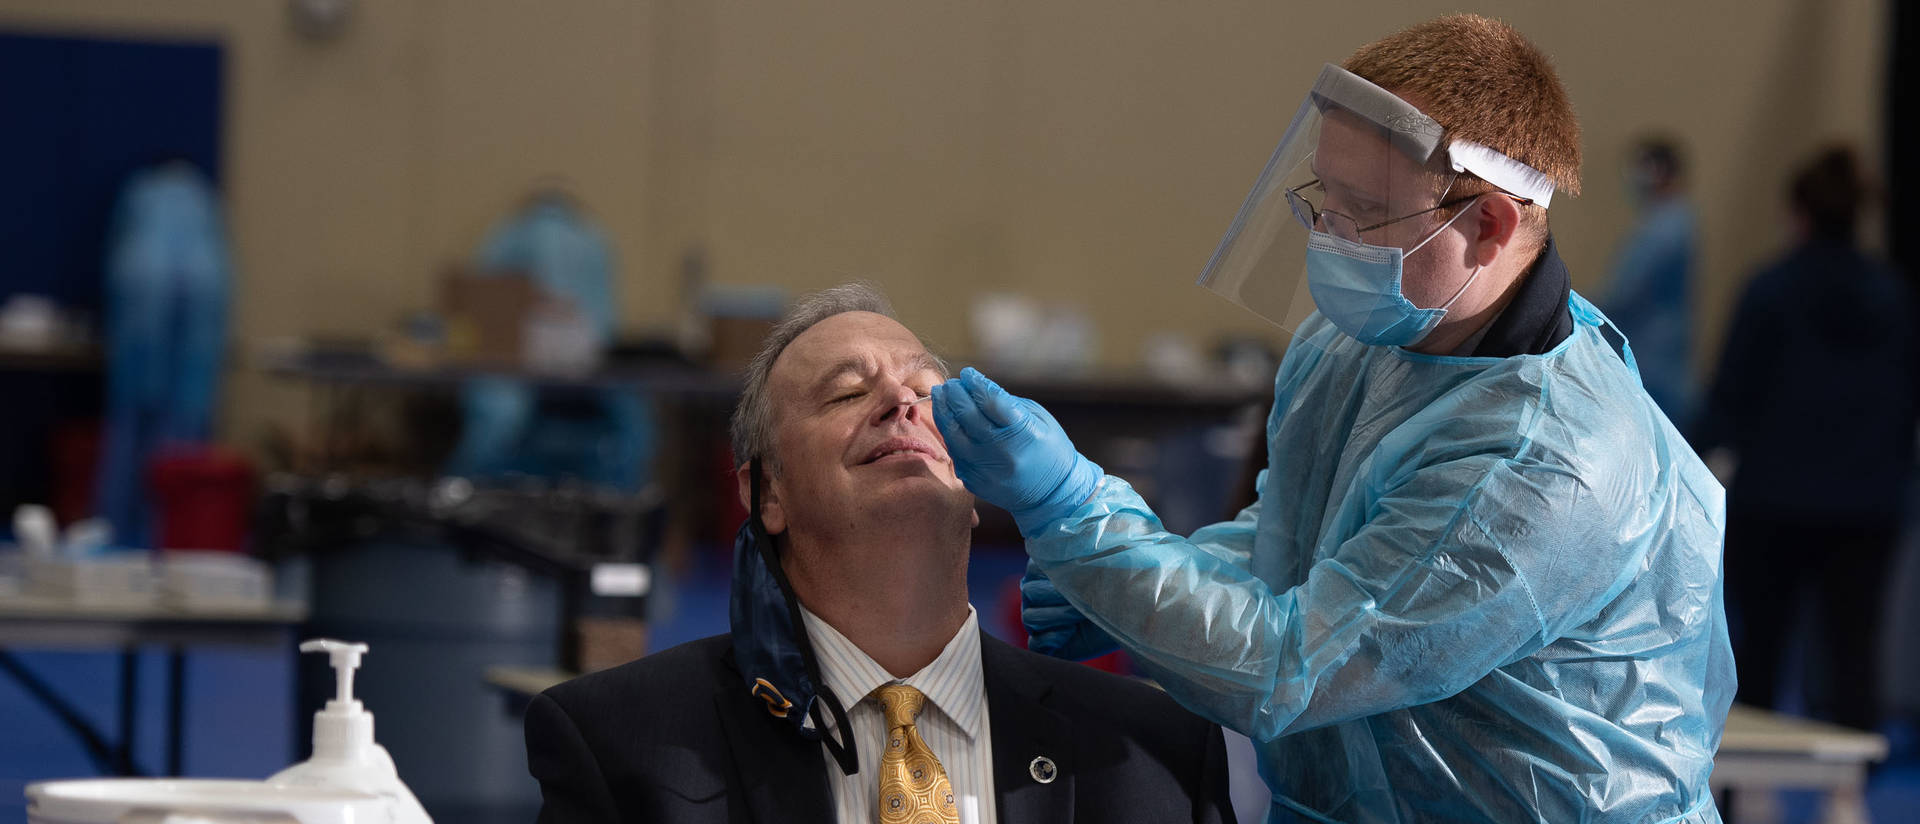 Chancellor James Schmidt received an antigen test for COVID-19 this week on campus similar to what all students in residence halls at UW-Eau Claire will undergo on a rotating schedule. The chancellor's test was negative.